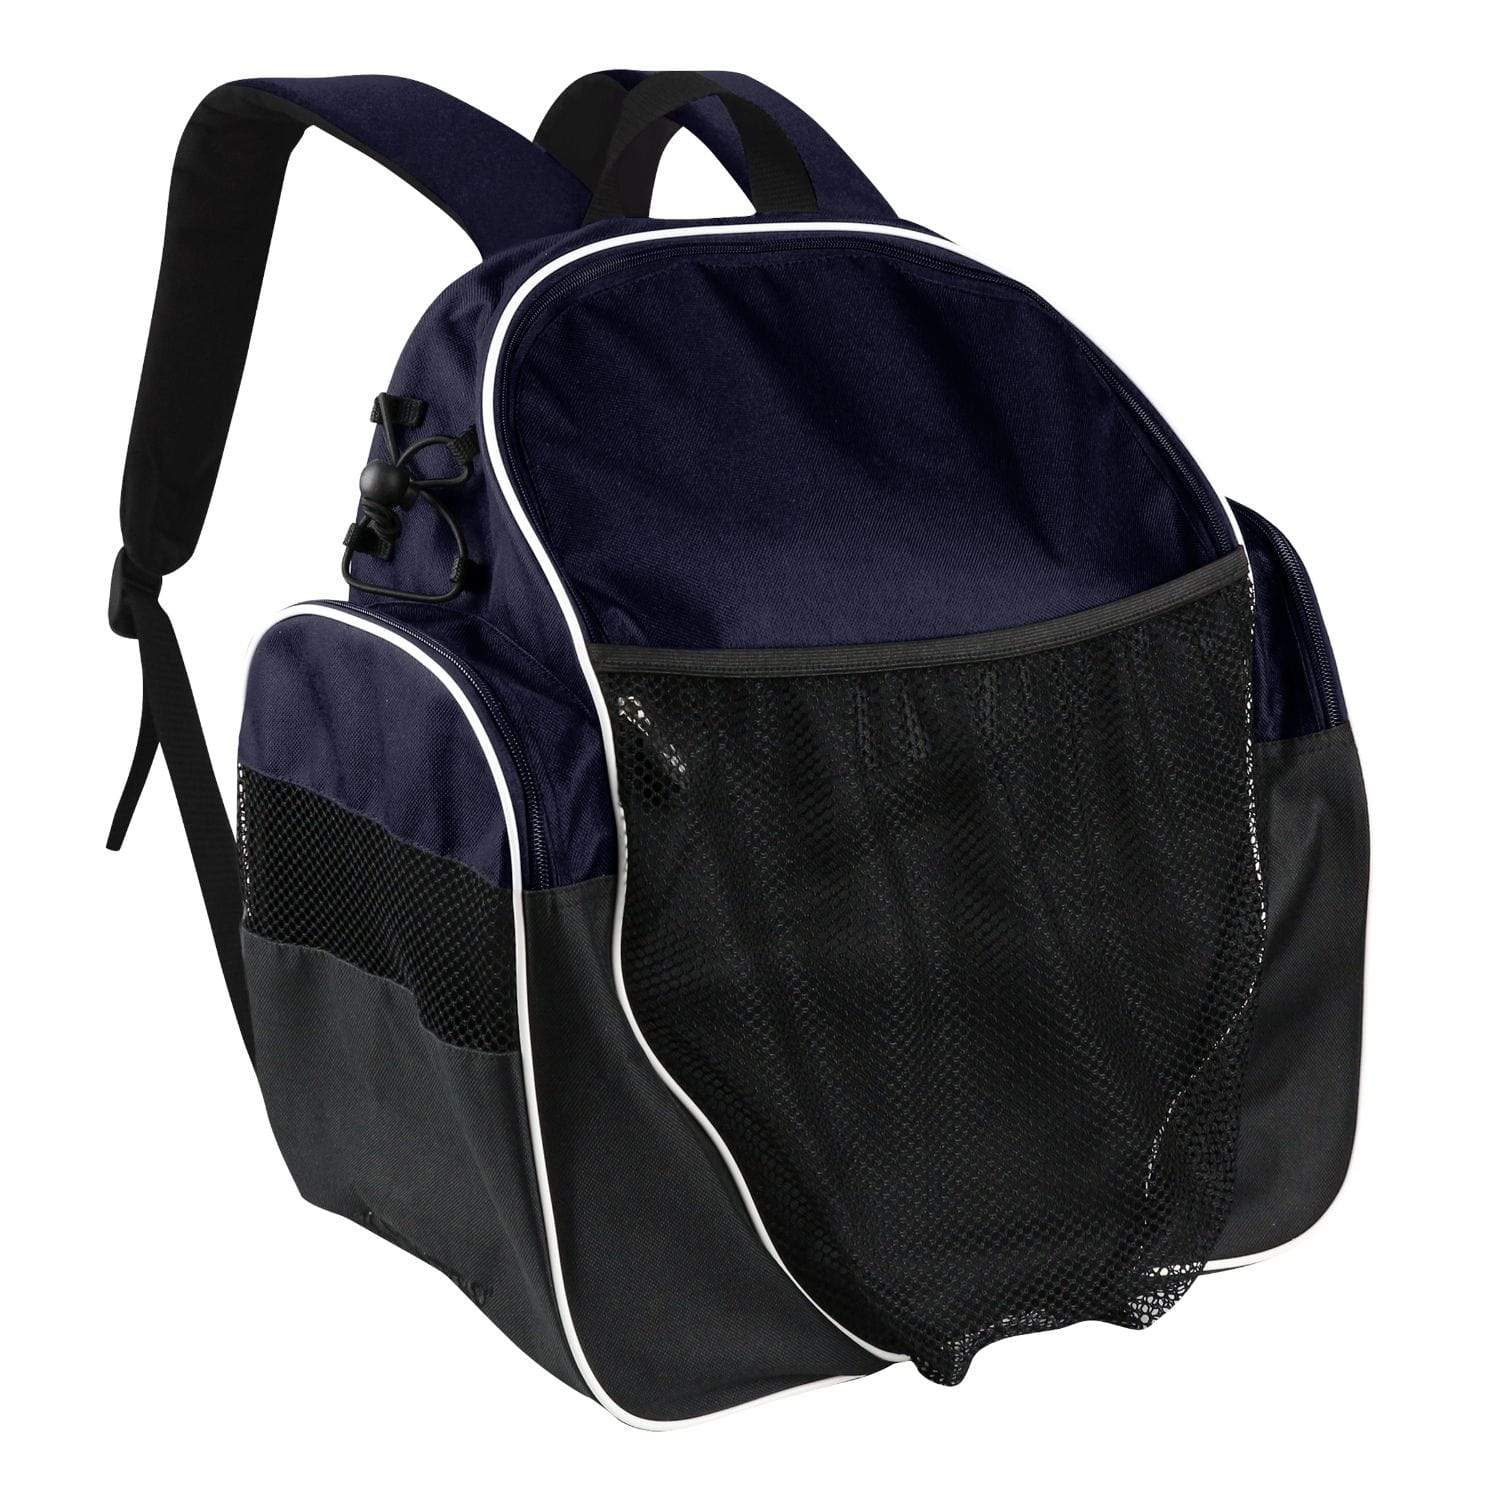 Champro Sports : Soccer Champro Players Pack 9in x 18 in x 18 in Navy